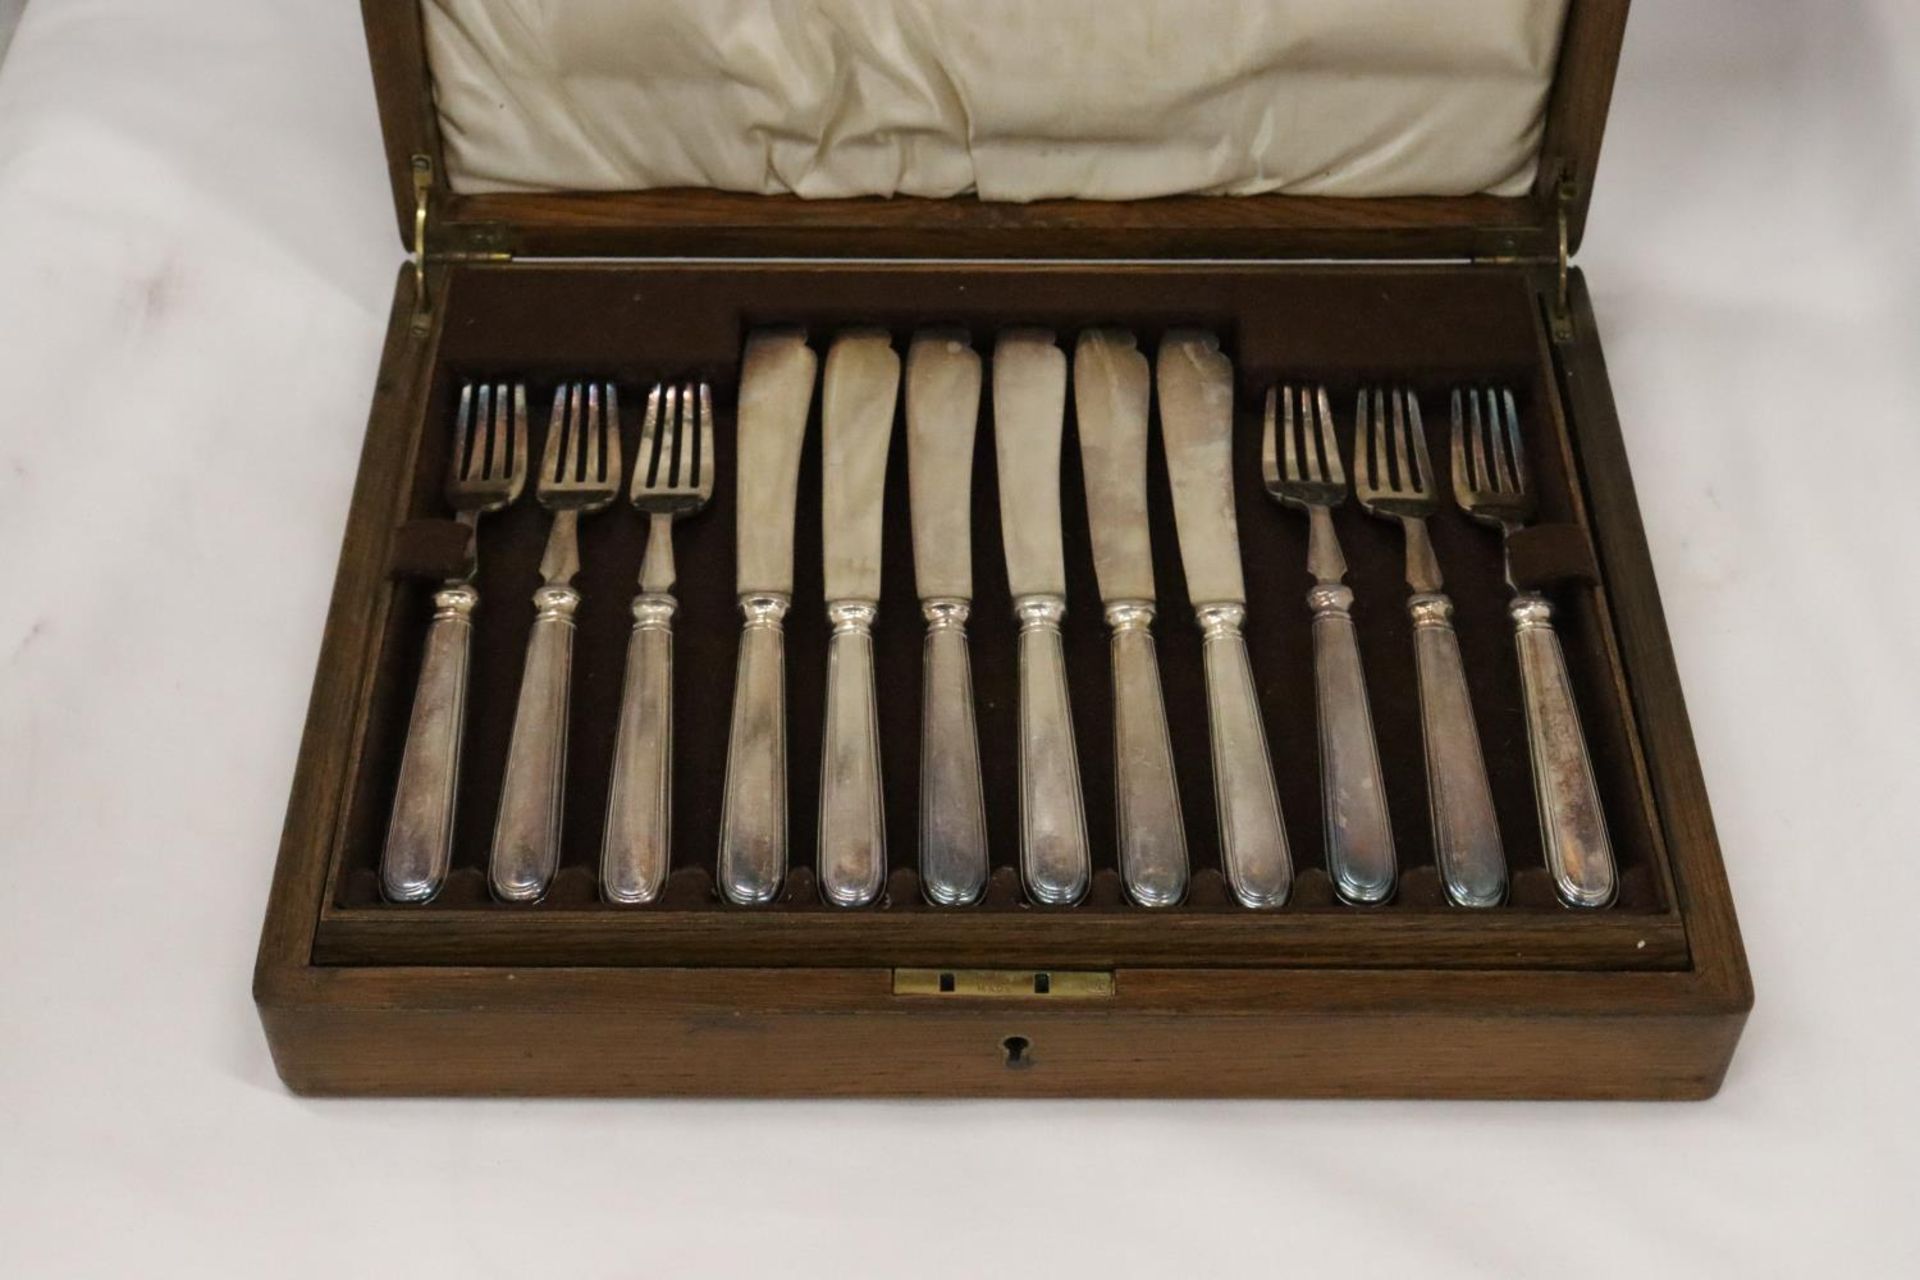 A VINTAGE MAPPIN AND WEBB KNIFE AND FORK SET IN A MAHOGANY CASE - Image 3 of 7